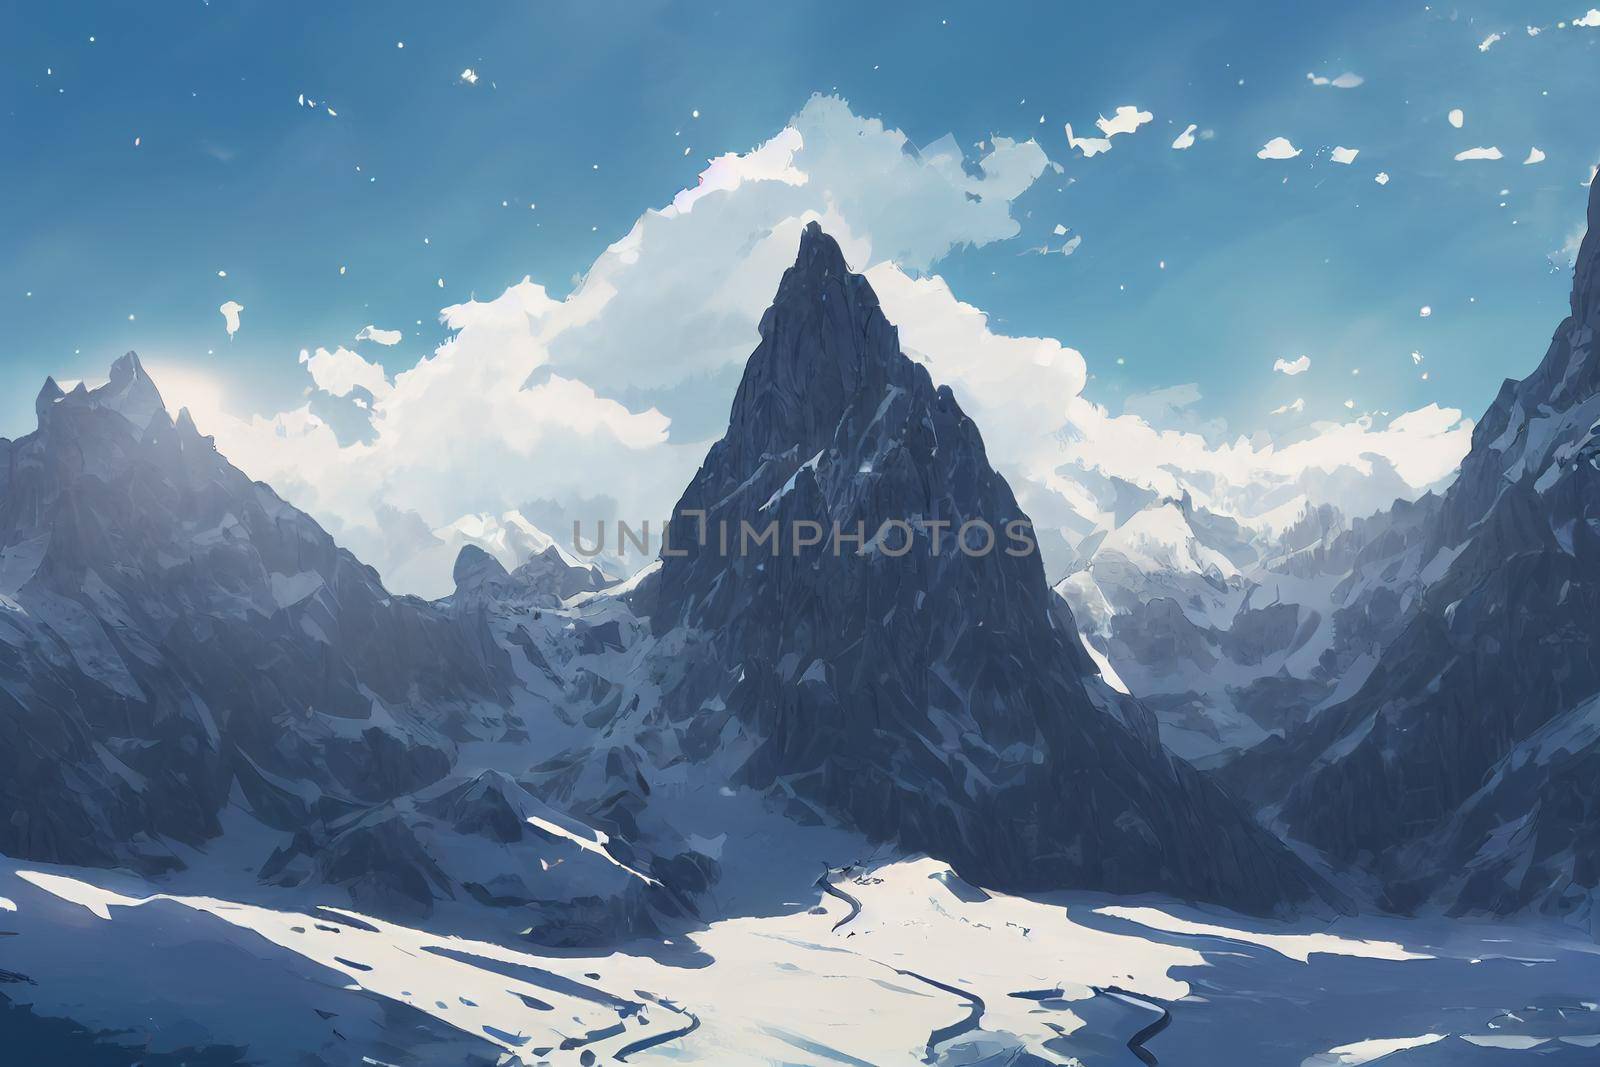 The mountain in the zugspitze arena, anime style, webtoon by 2ragon